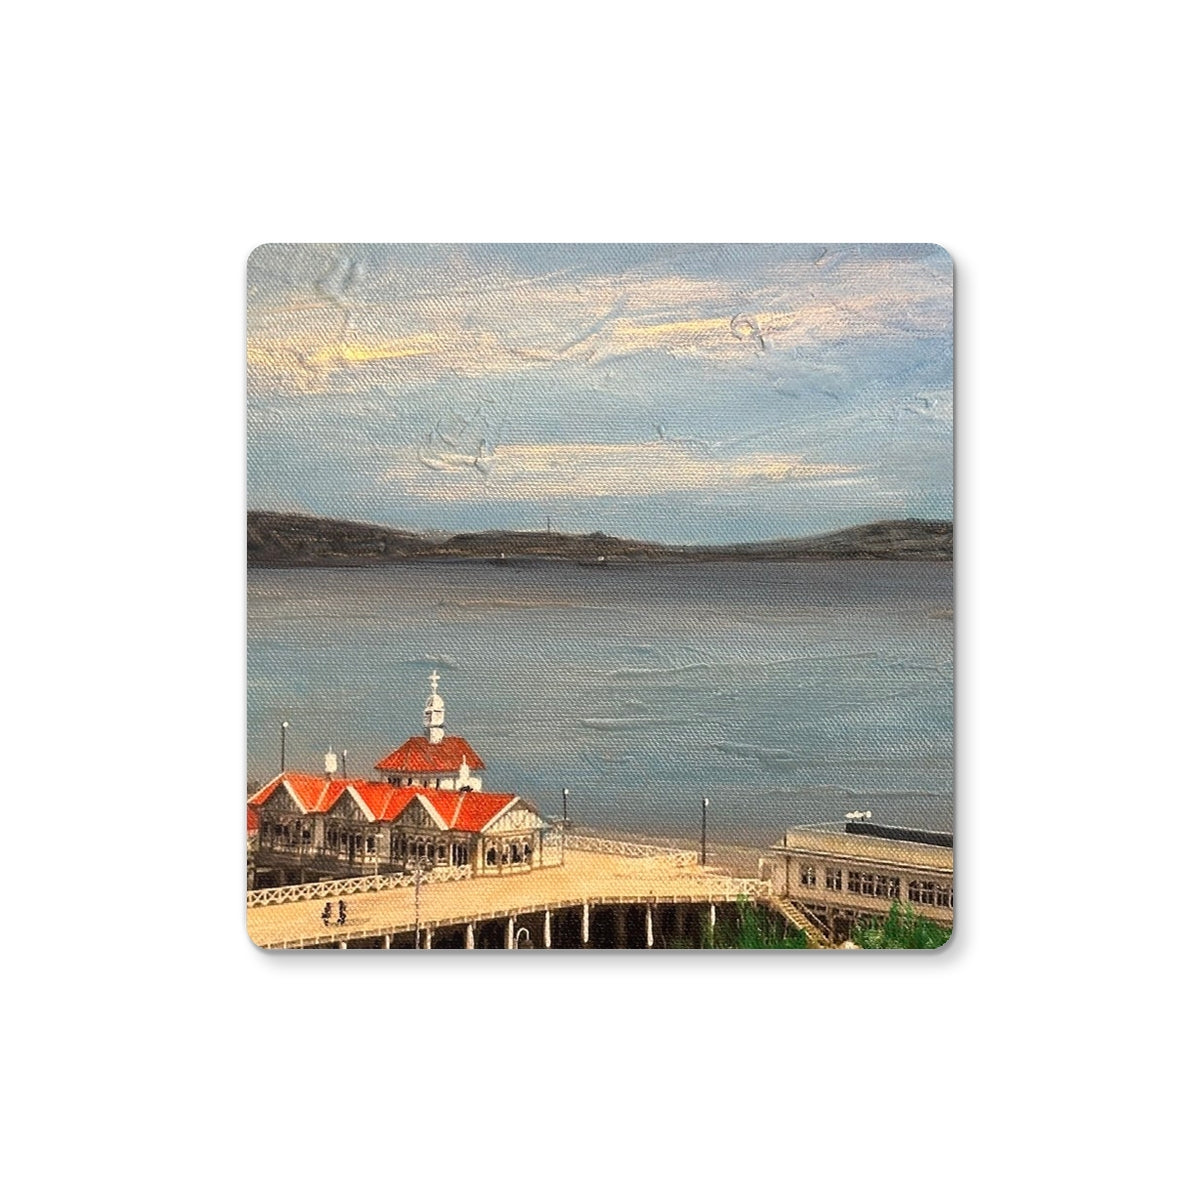 Looking From Dunoon Art Gifts Coaster